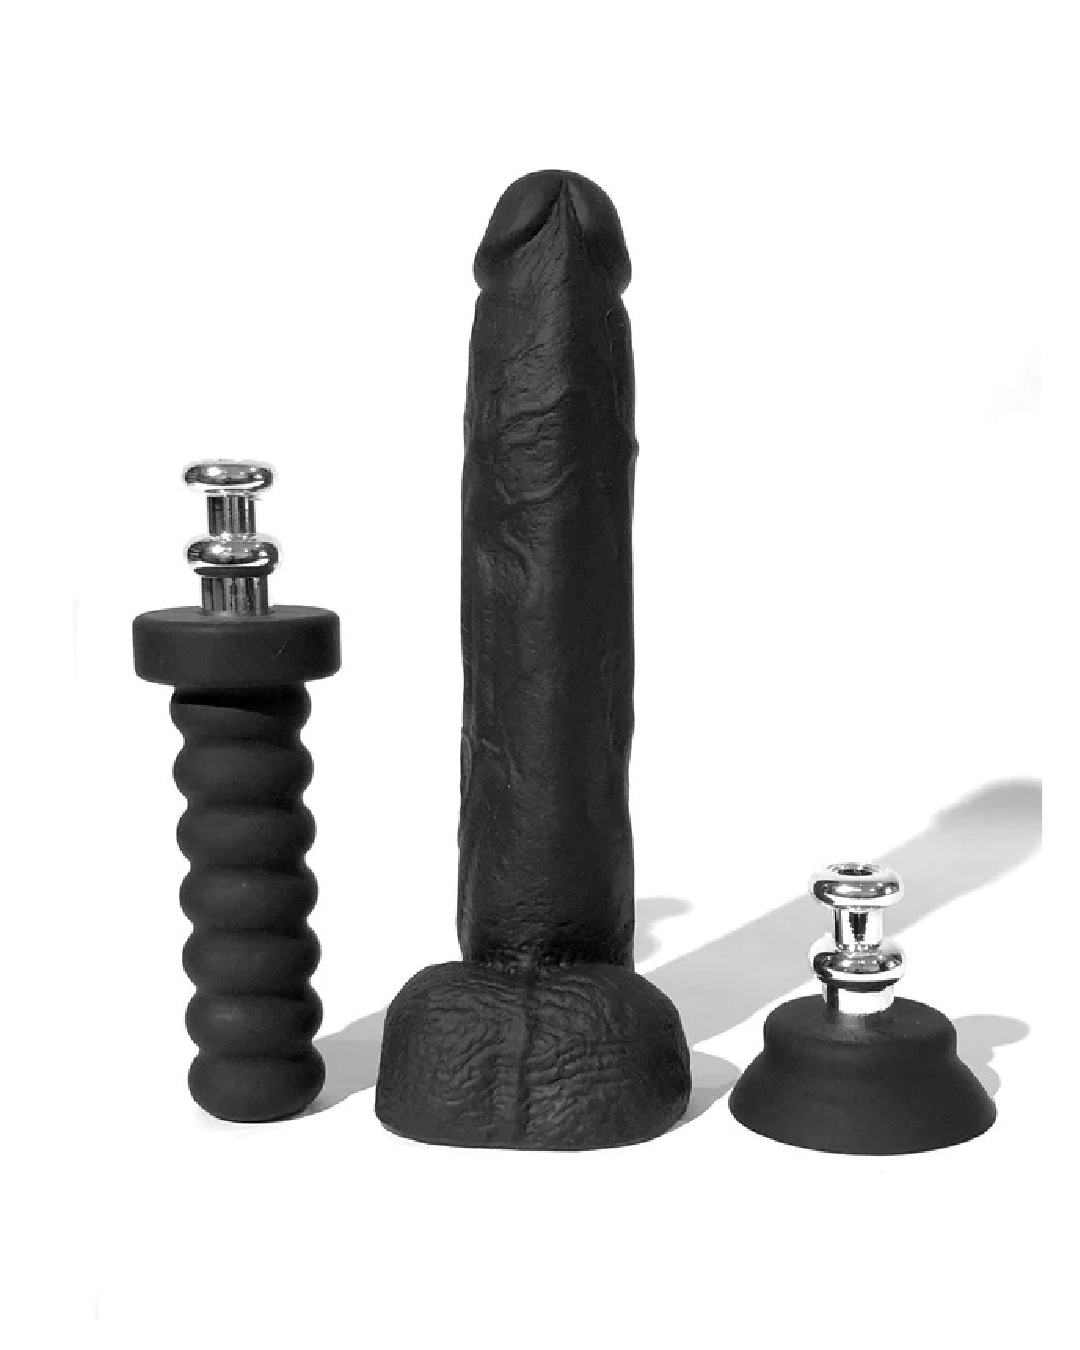 Boneyard 10 Inch Black Silicone Dildo with Handle & Suction Cup Attachment